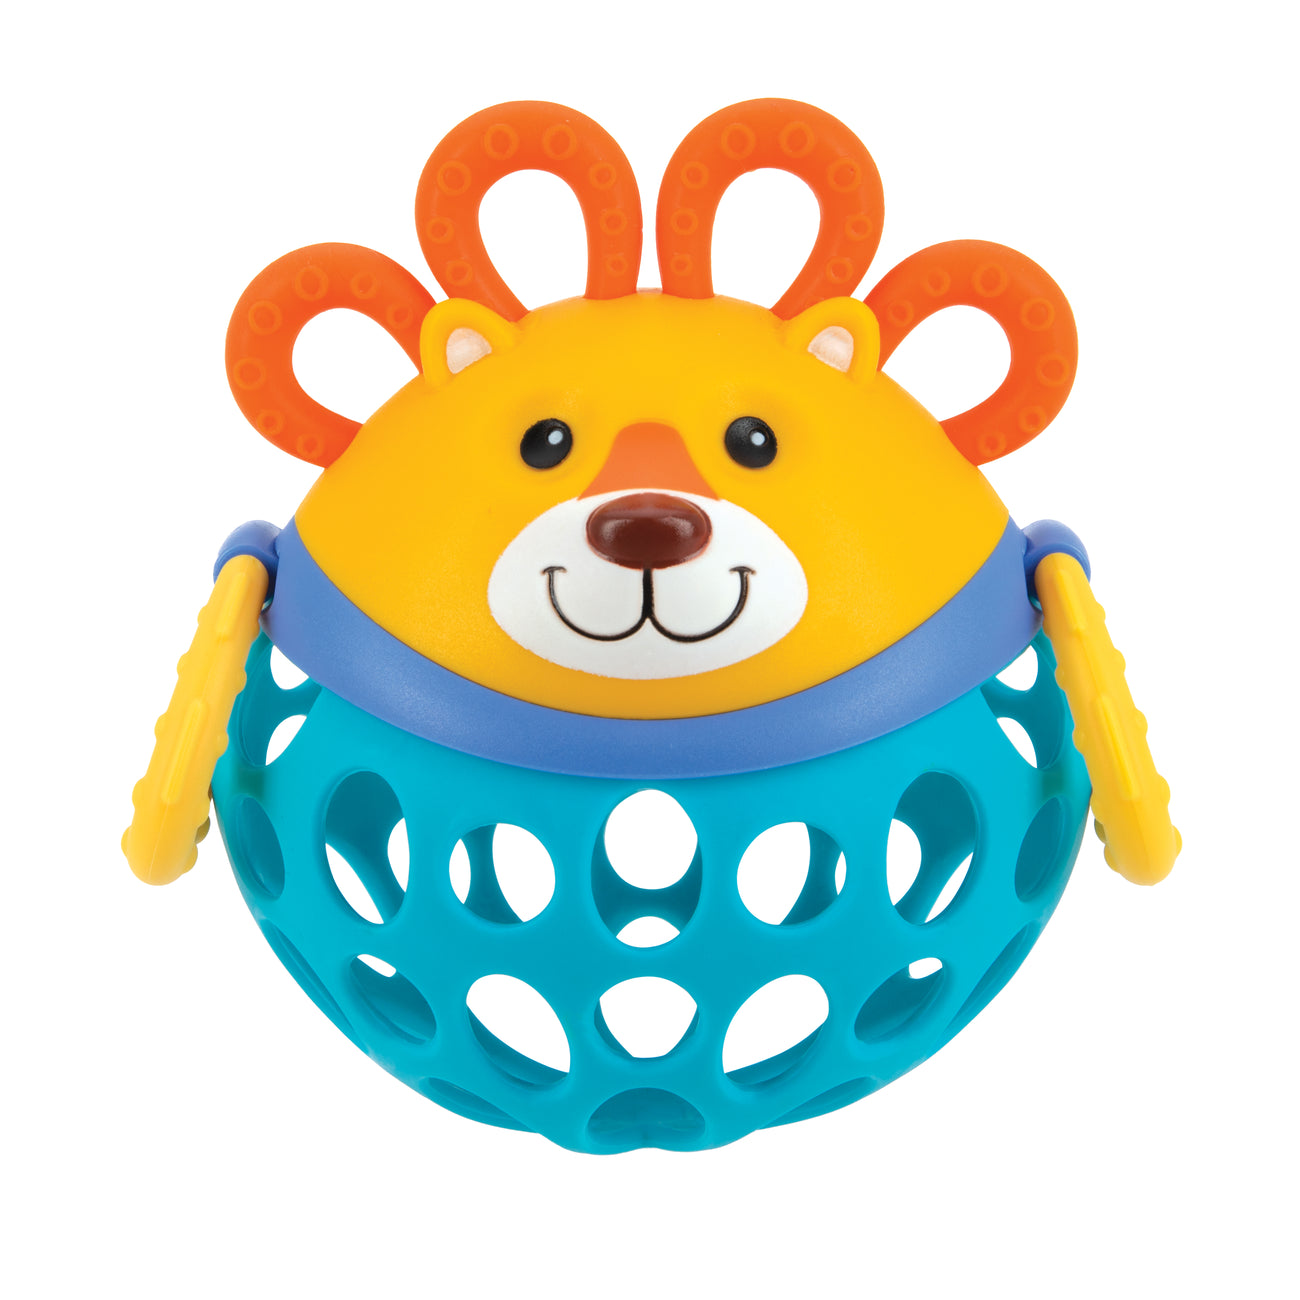 Silly Shaker Animal Rattle Toy - Lion - Nuby US